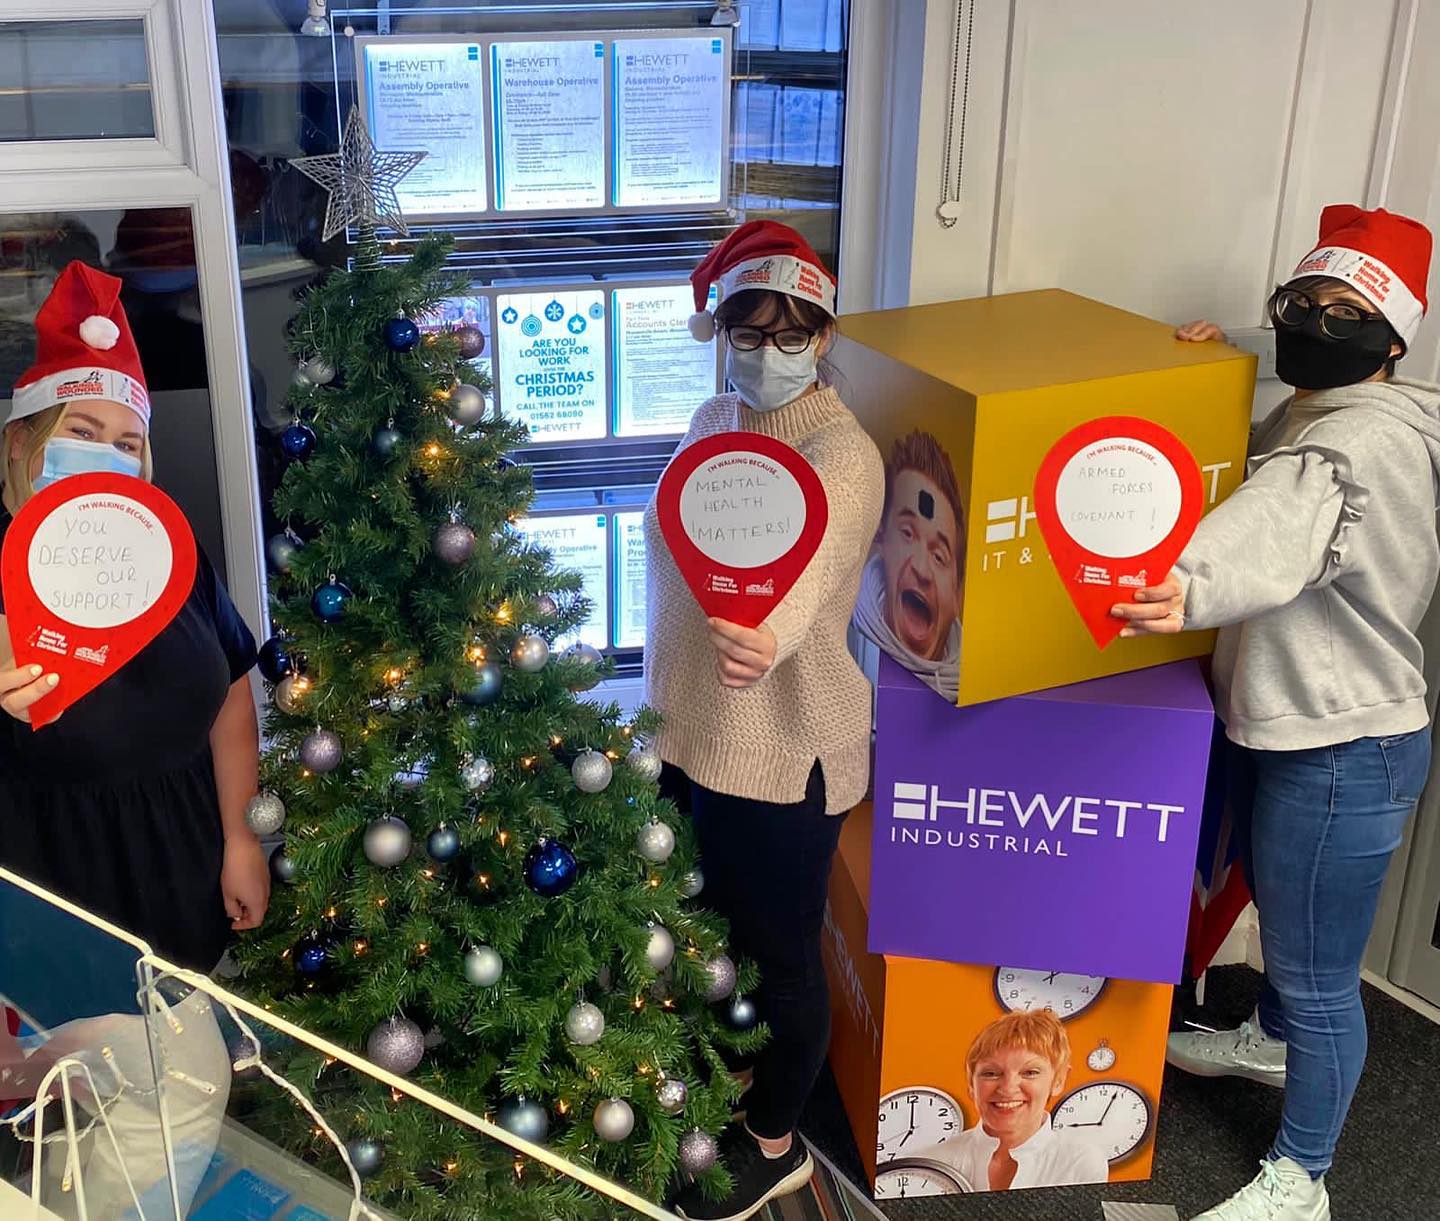 Hewett Recruitment Worcestershire team raise funds for Walking with the Wounded in Walking home for Christmas challenge